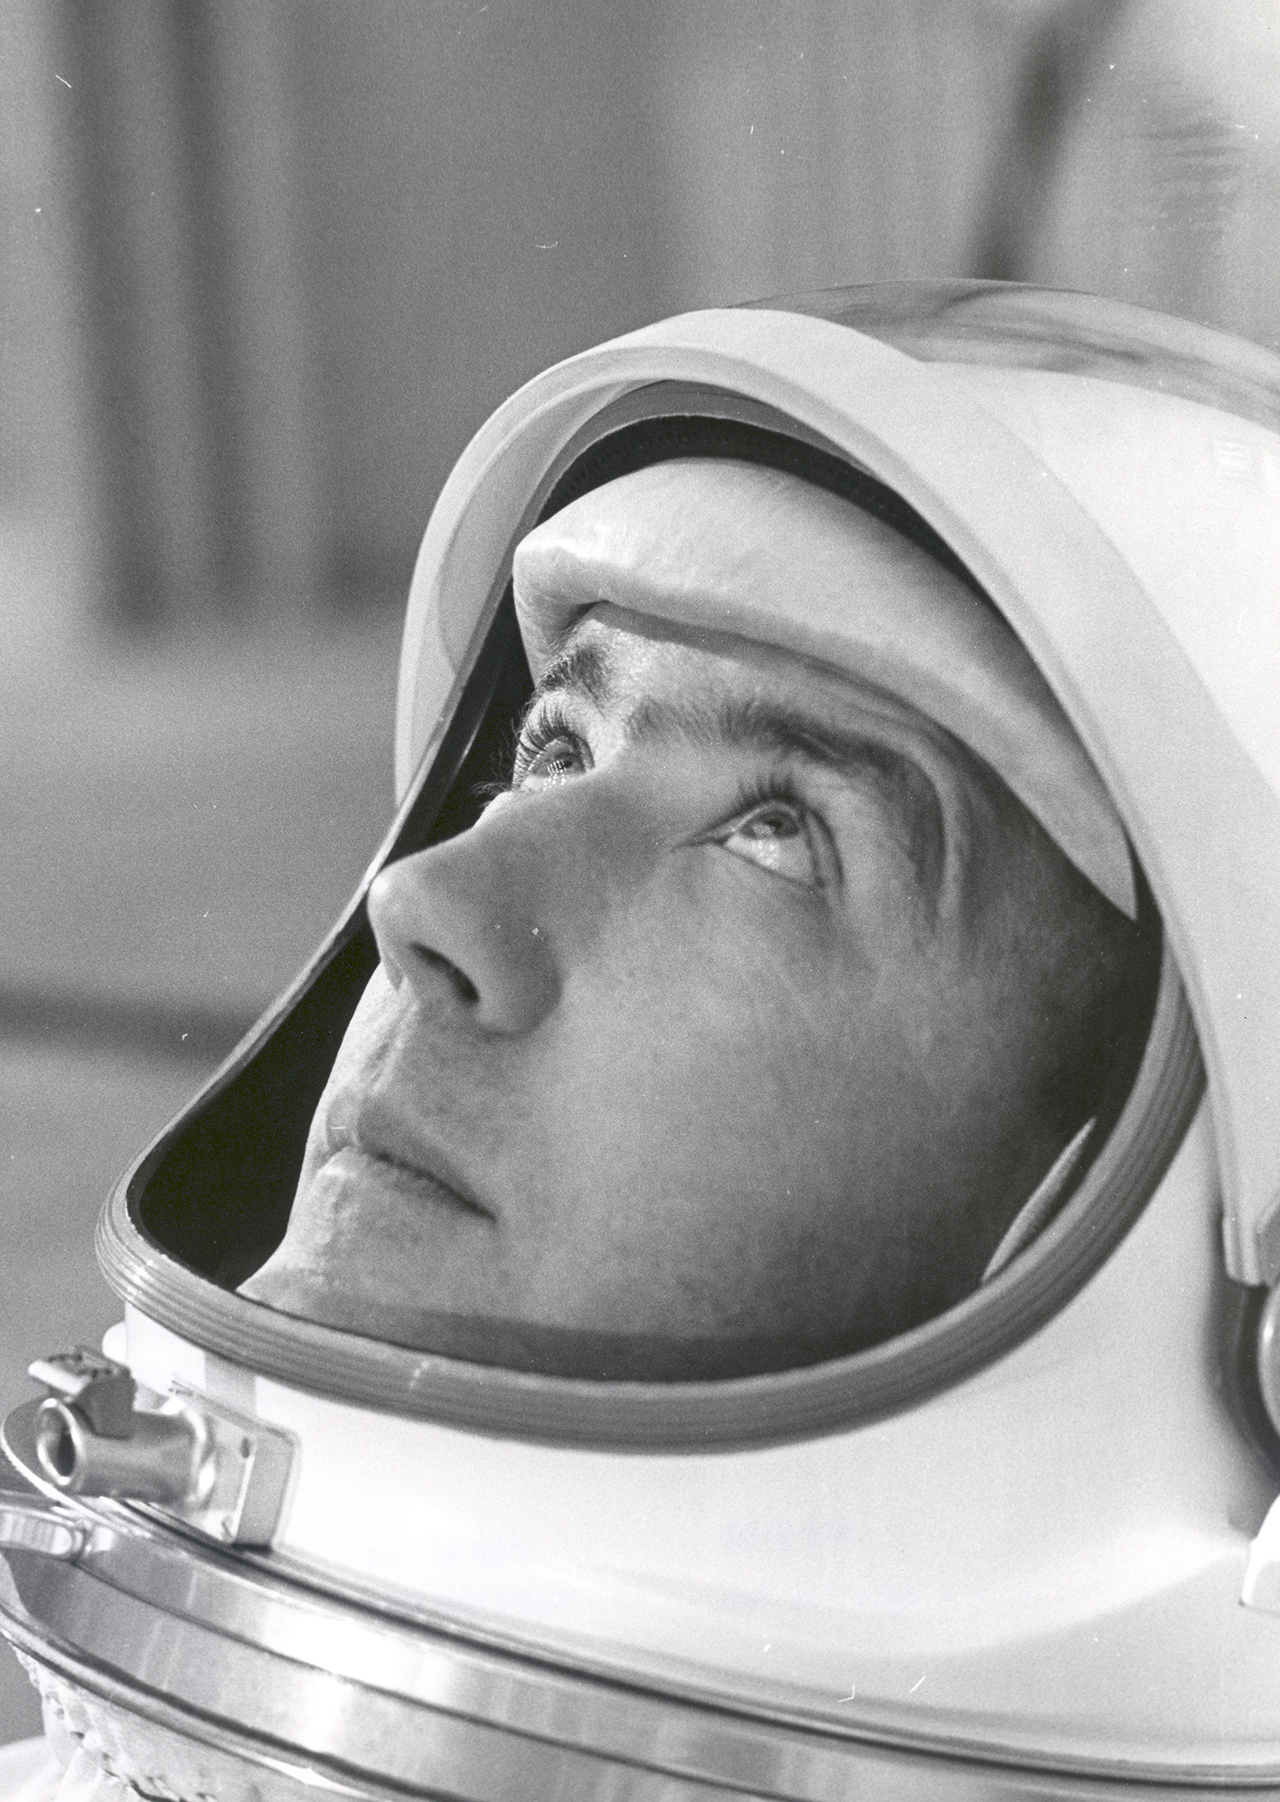 Jim McDivitt is suited in preparation for weight and balance training tests ahead of the Gemini 4 mission.